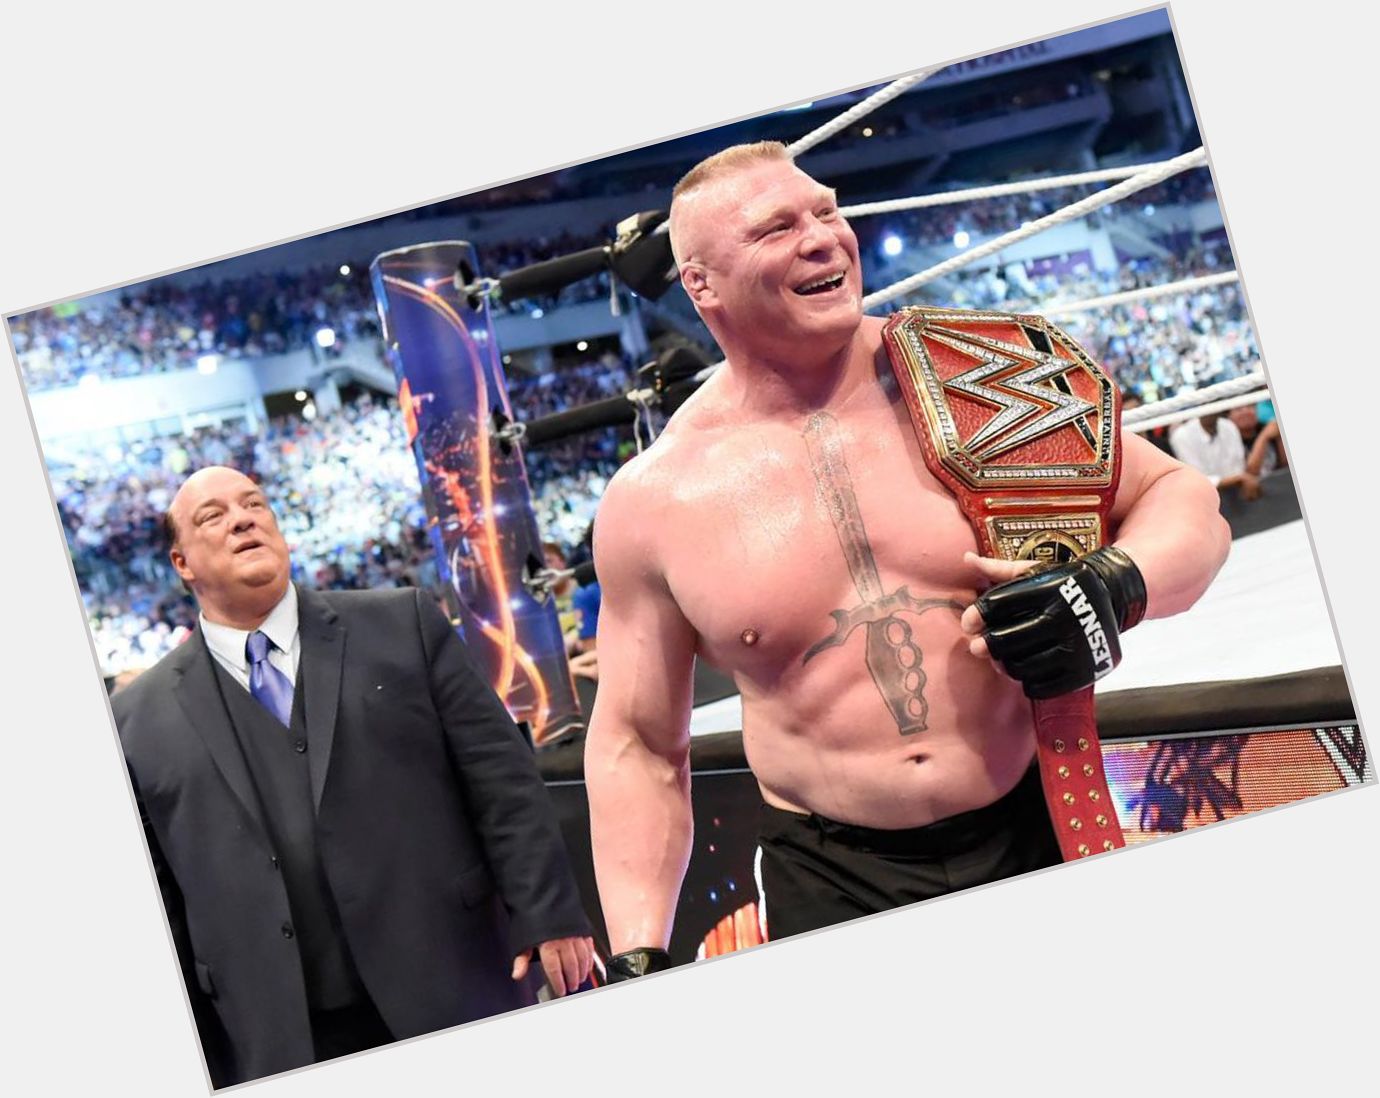 Happy birthday to Universal champion and former champion Brock Lesnar! 